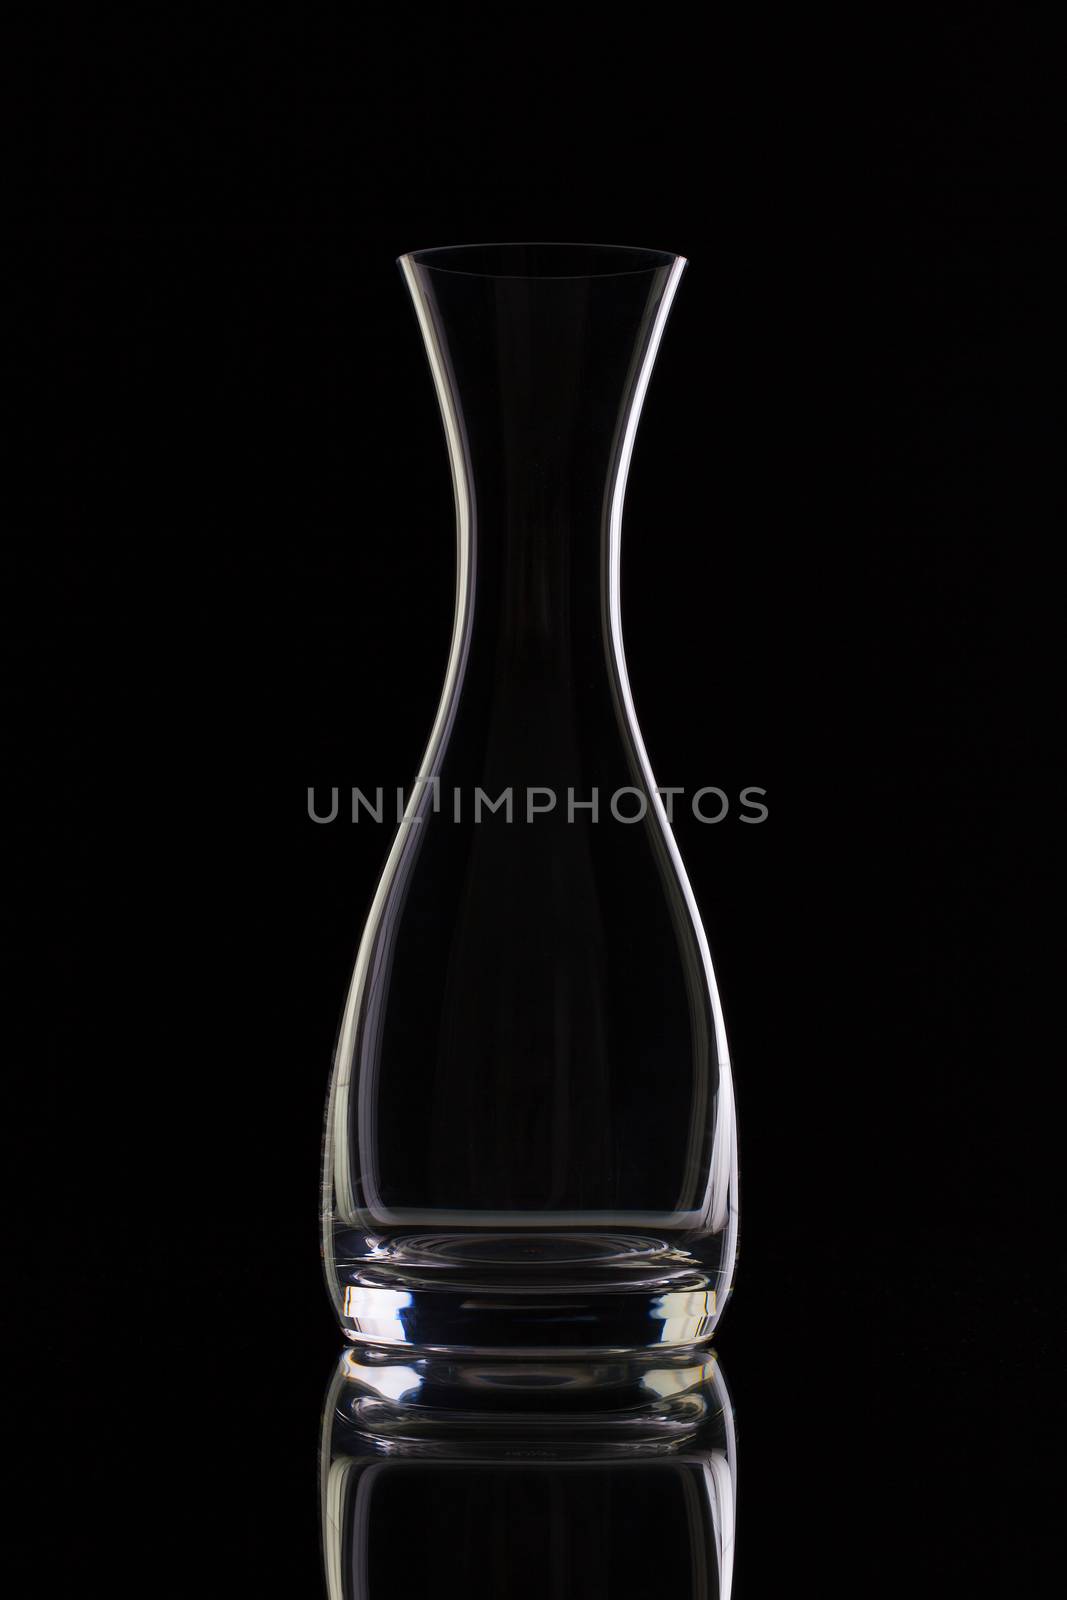 Empty glass on water on the black glass desk